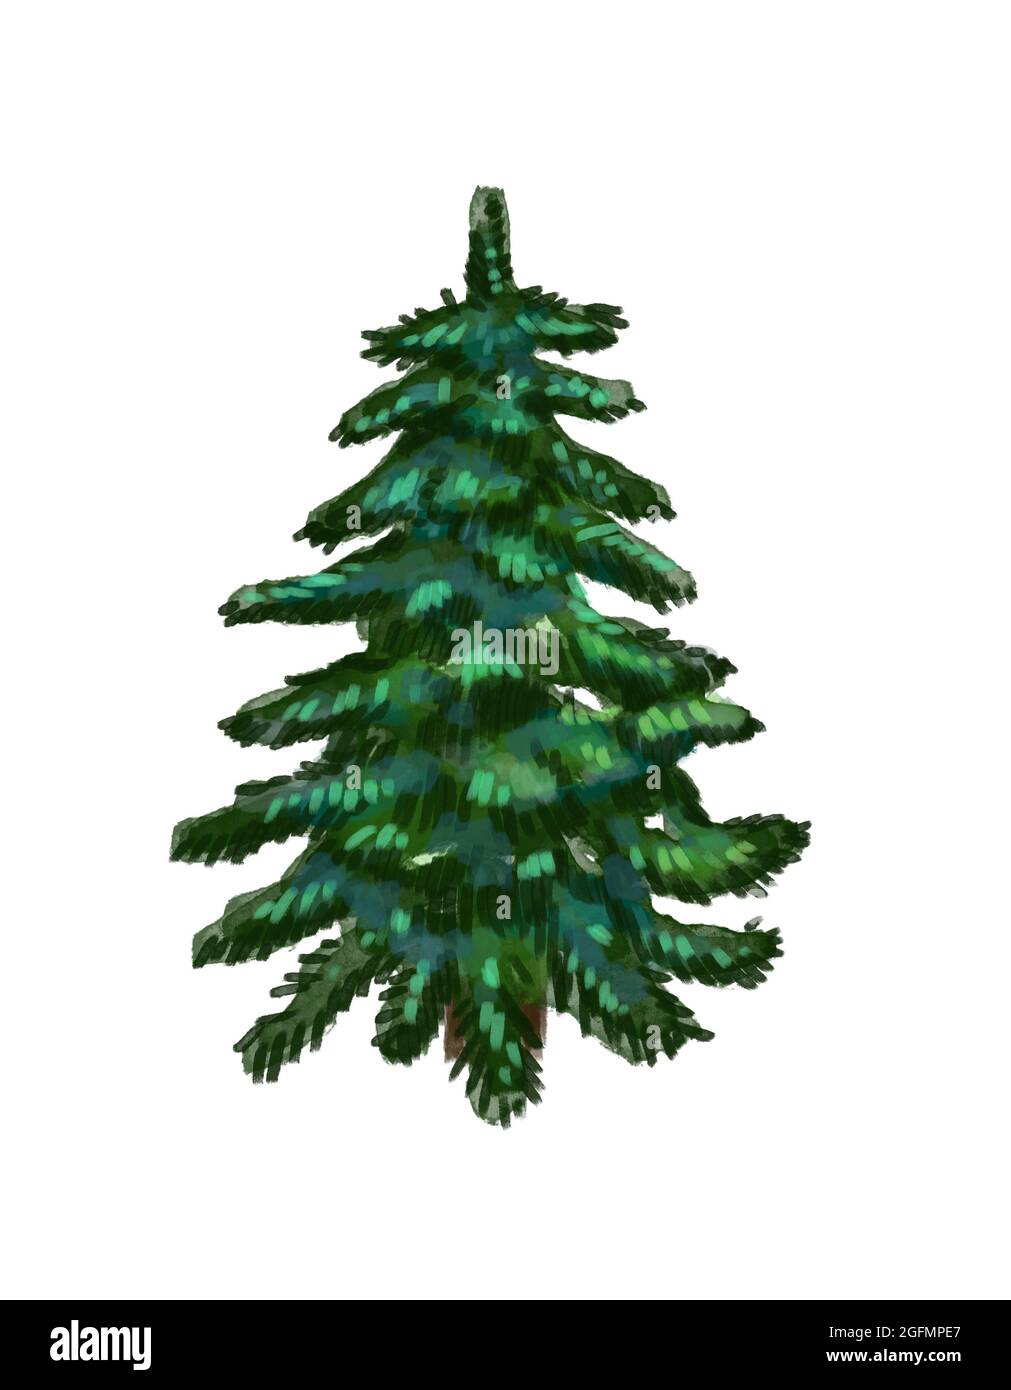 Watercolor green Christmas tree on white background. Stock Photo